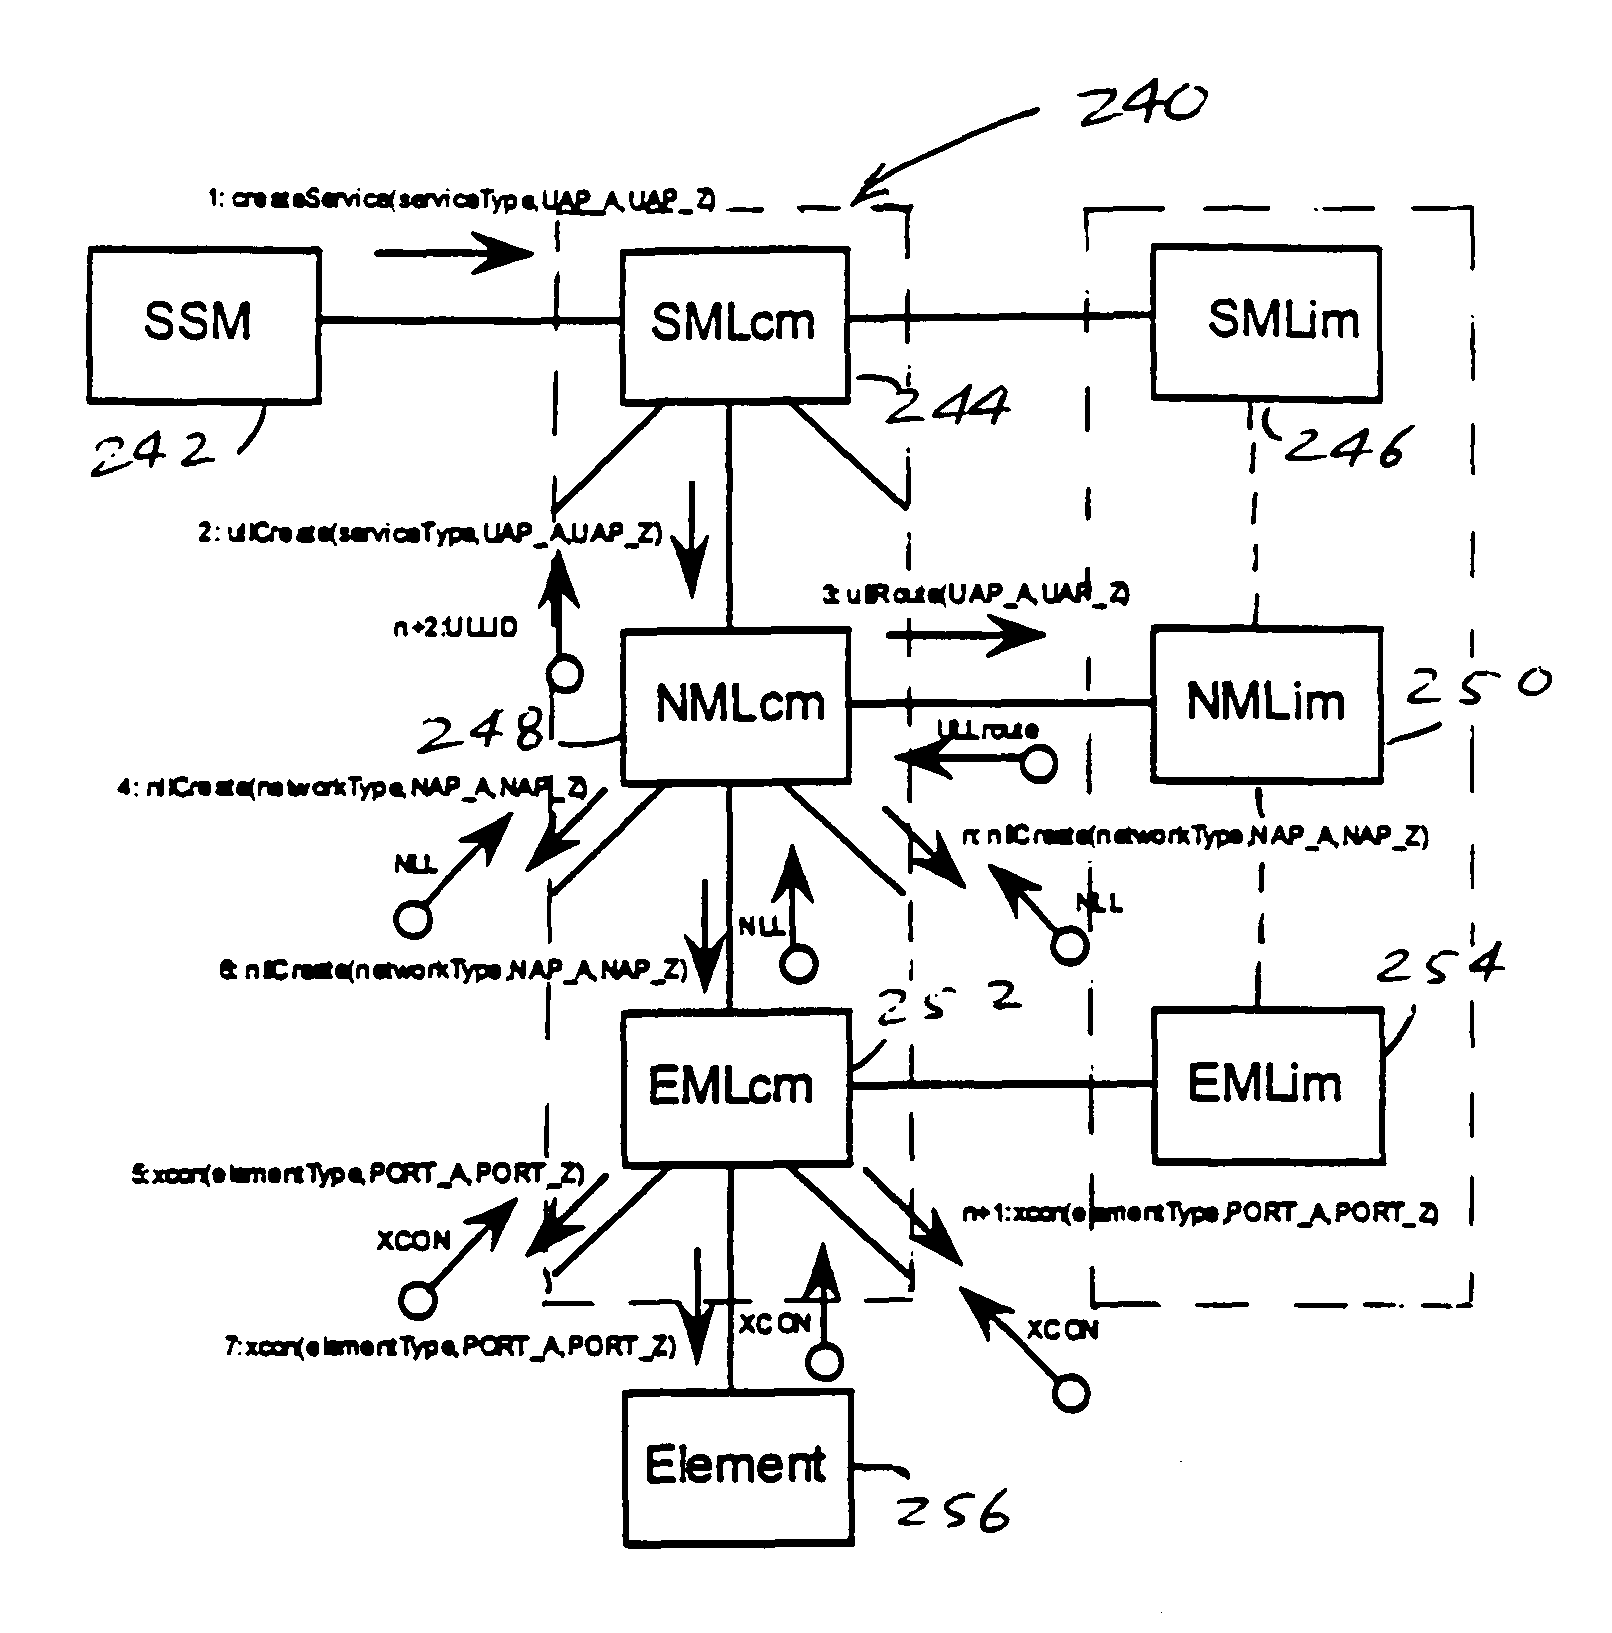 Network management system and graphical user interface